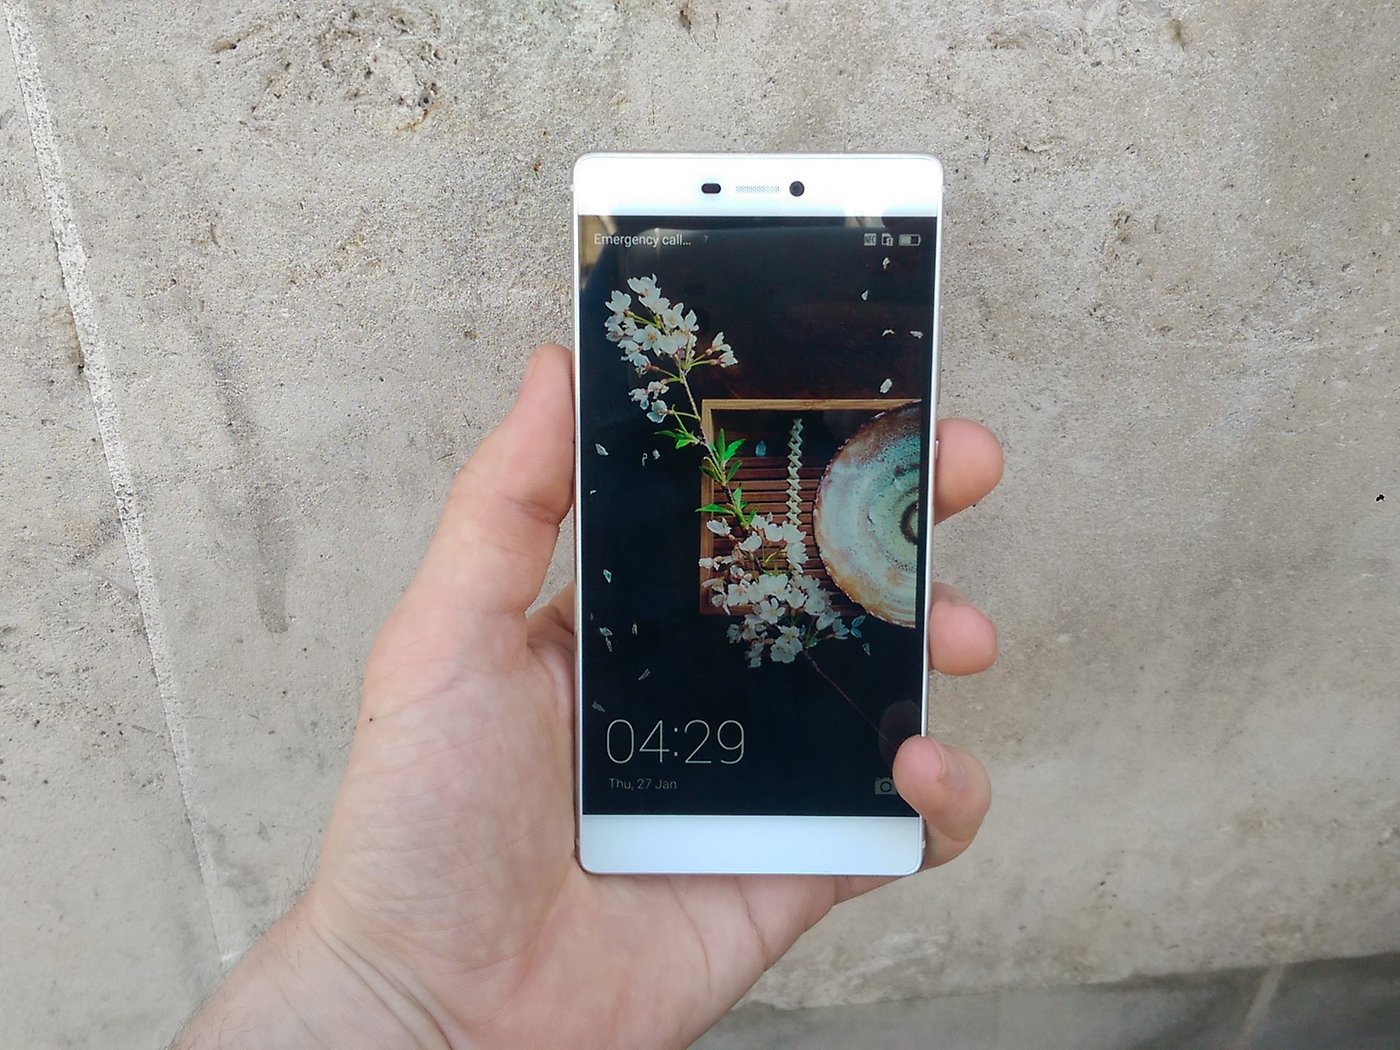 Huawei P8 and tricks: new ways to your P8 NextPit